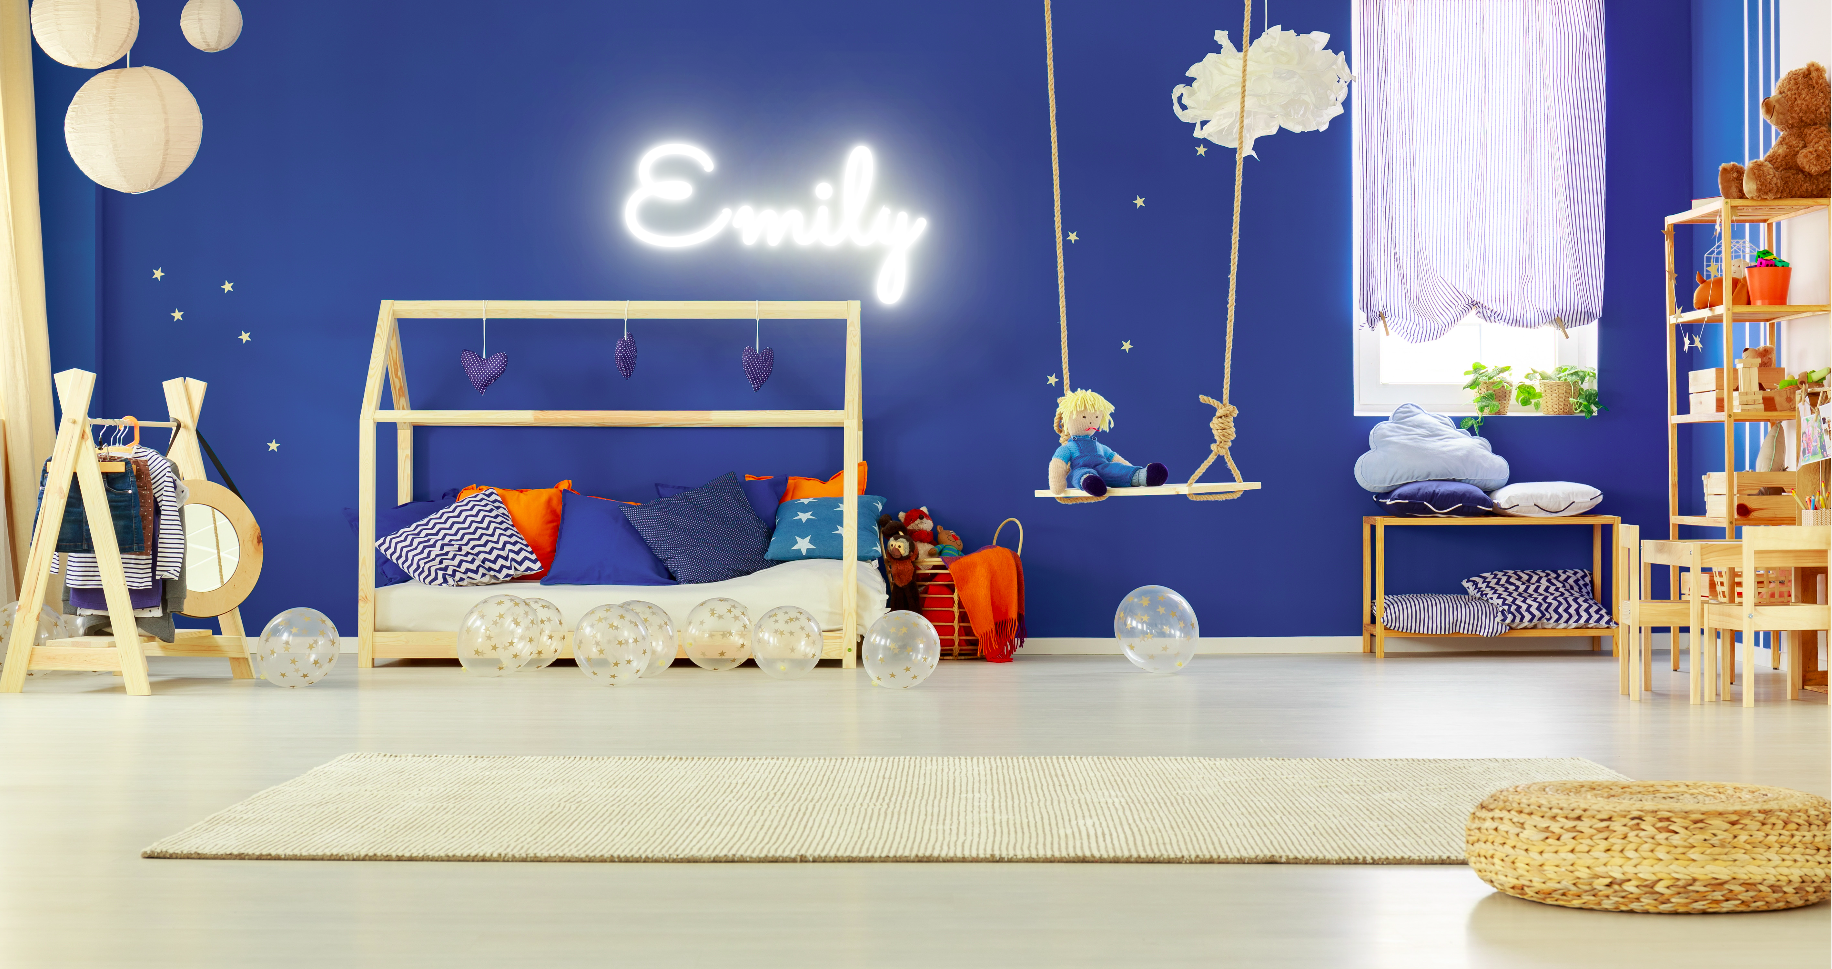 "Emily" Baby Name LED Neon Sign